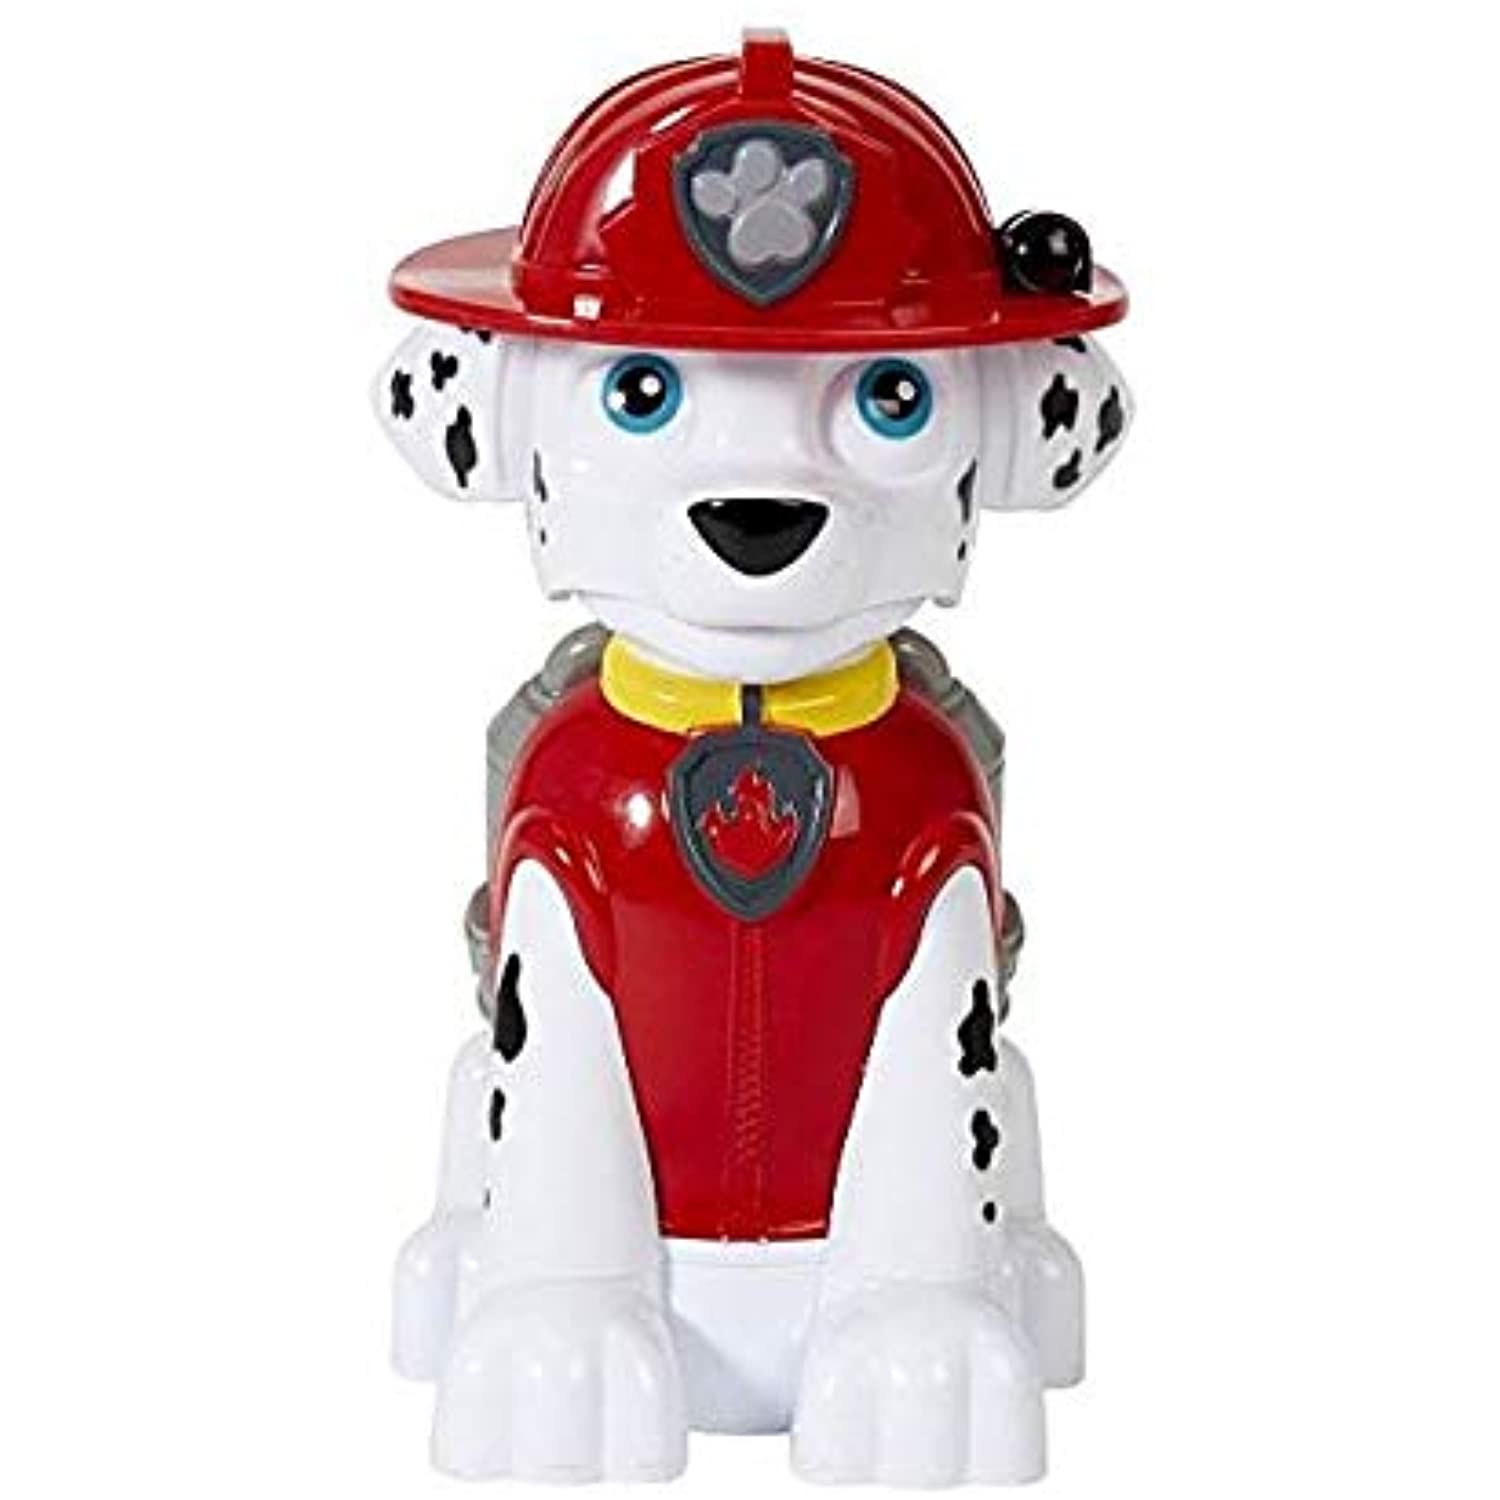 Nickelodeon Little Kids Paw Patrol Marshall Action Bubble Blower